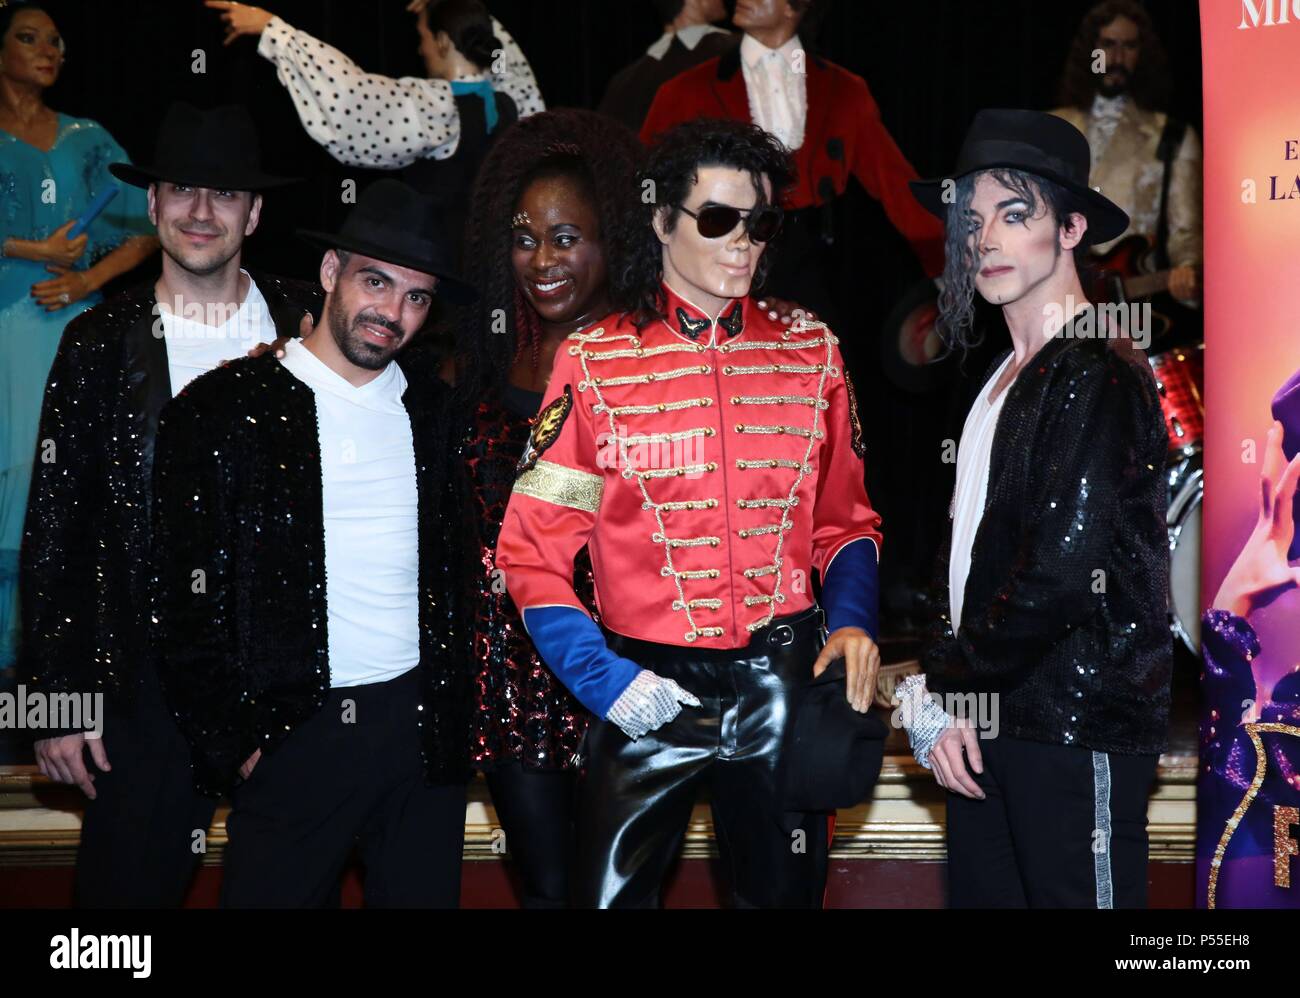 How state museum got Michael Jackson's jacket